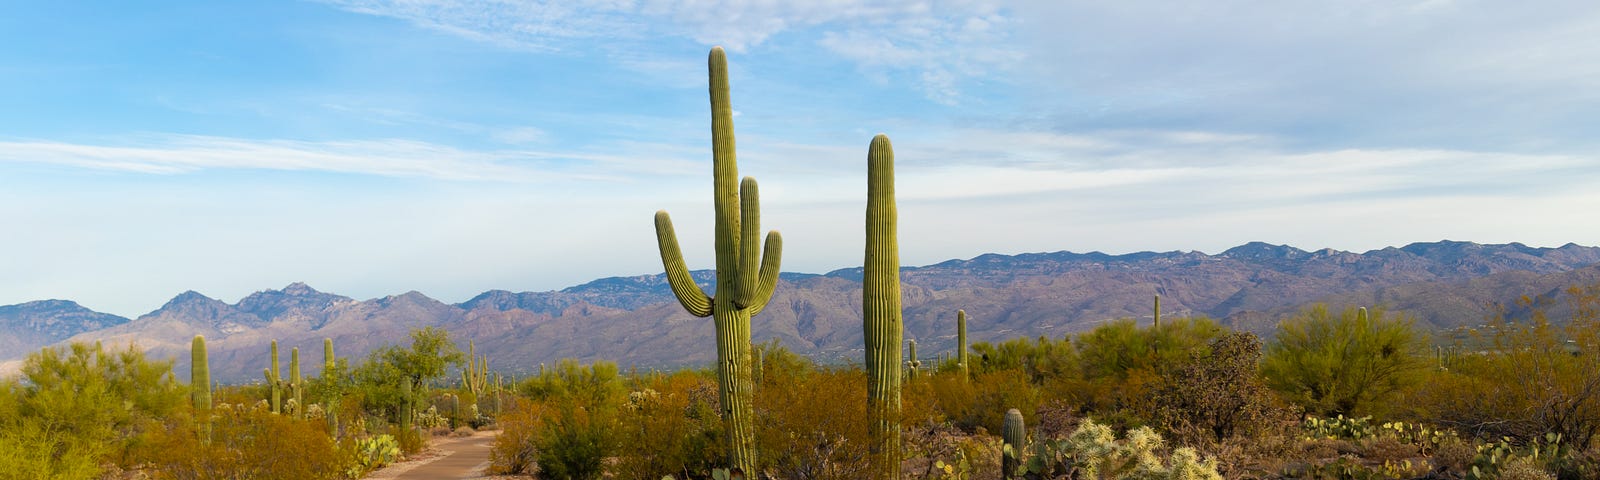 A dusty landscape with cacti growing.